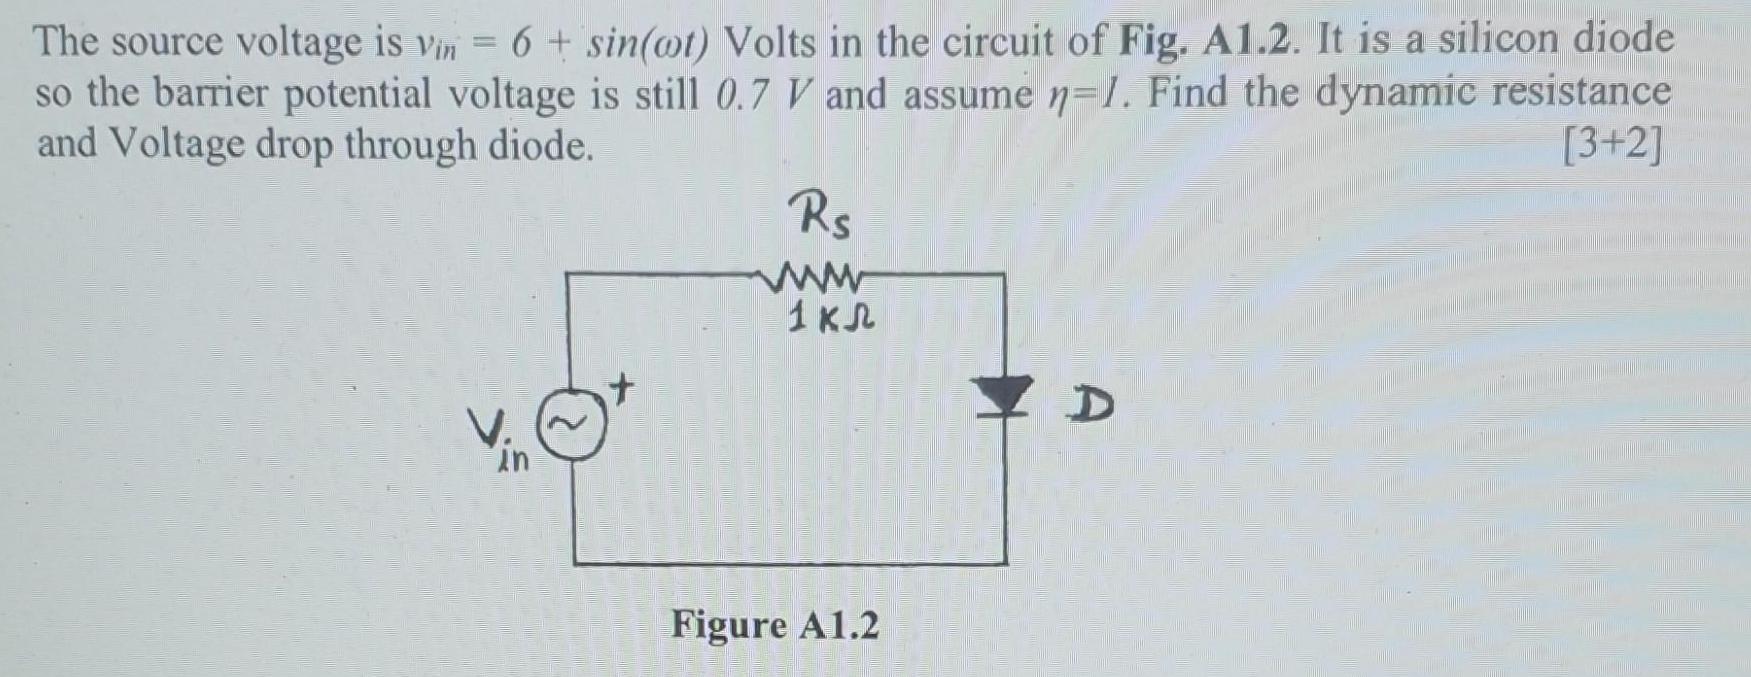 The source voltage is vin = 6 + sin(oot) Volts in the circuit of Fig. A1.2. It is a silicon diode so the